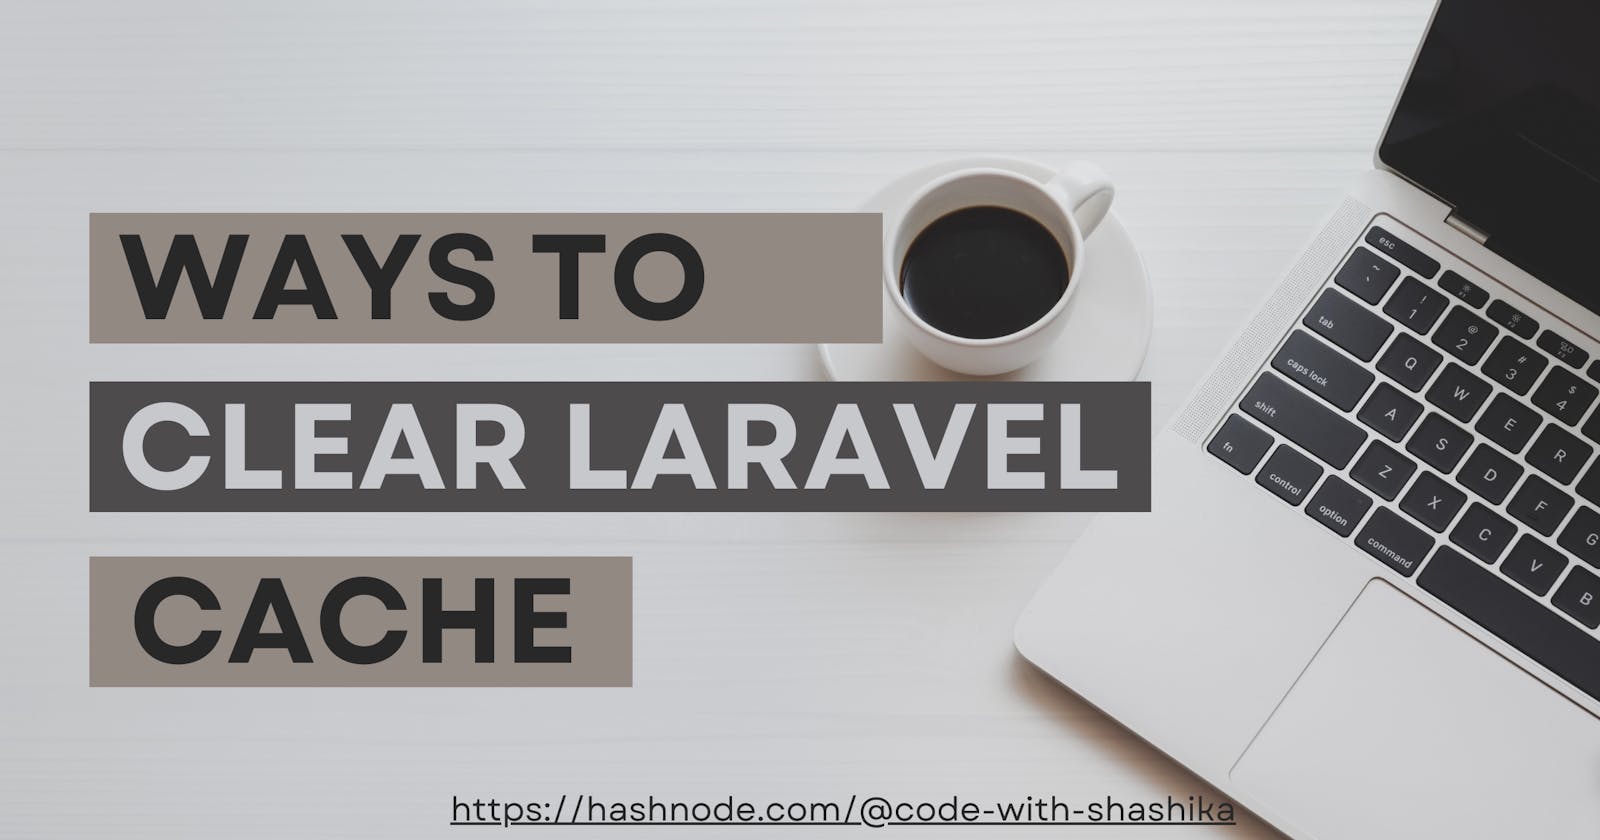 How to clear the Laravel cache?